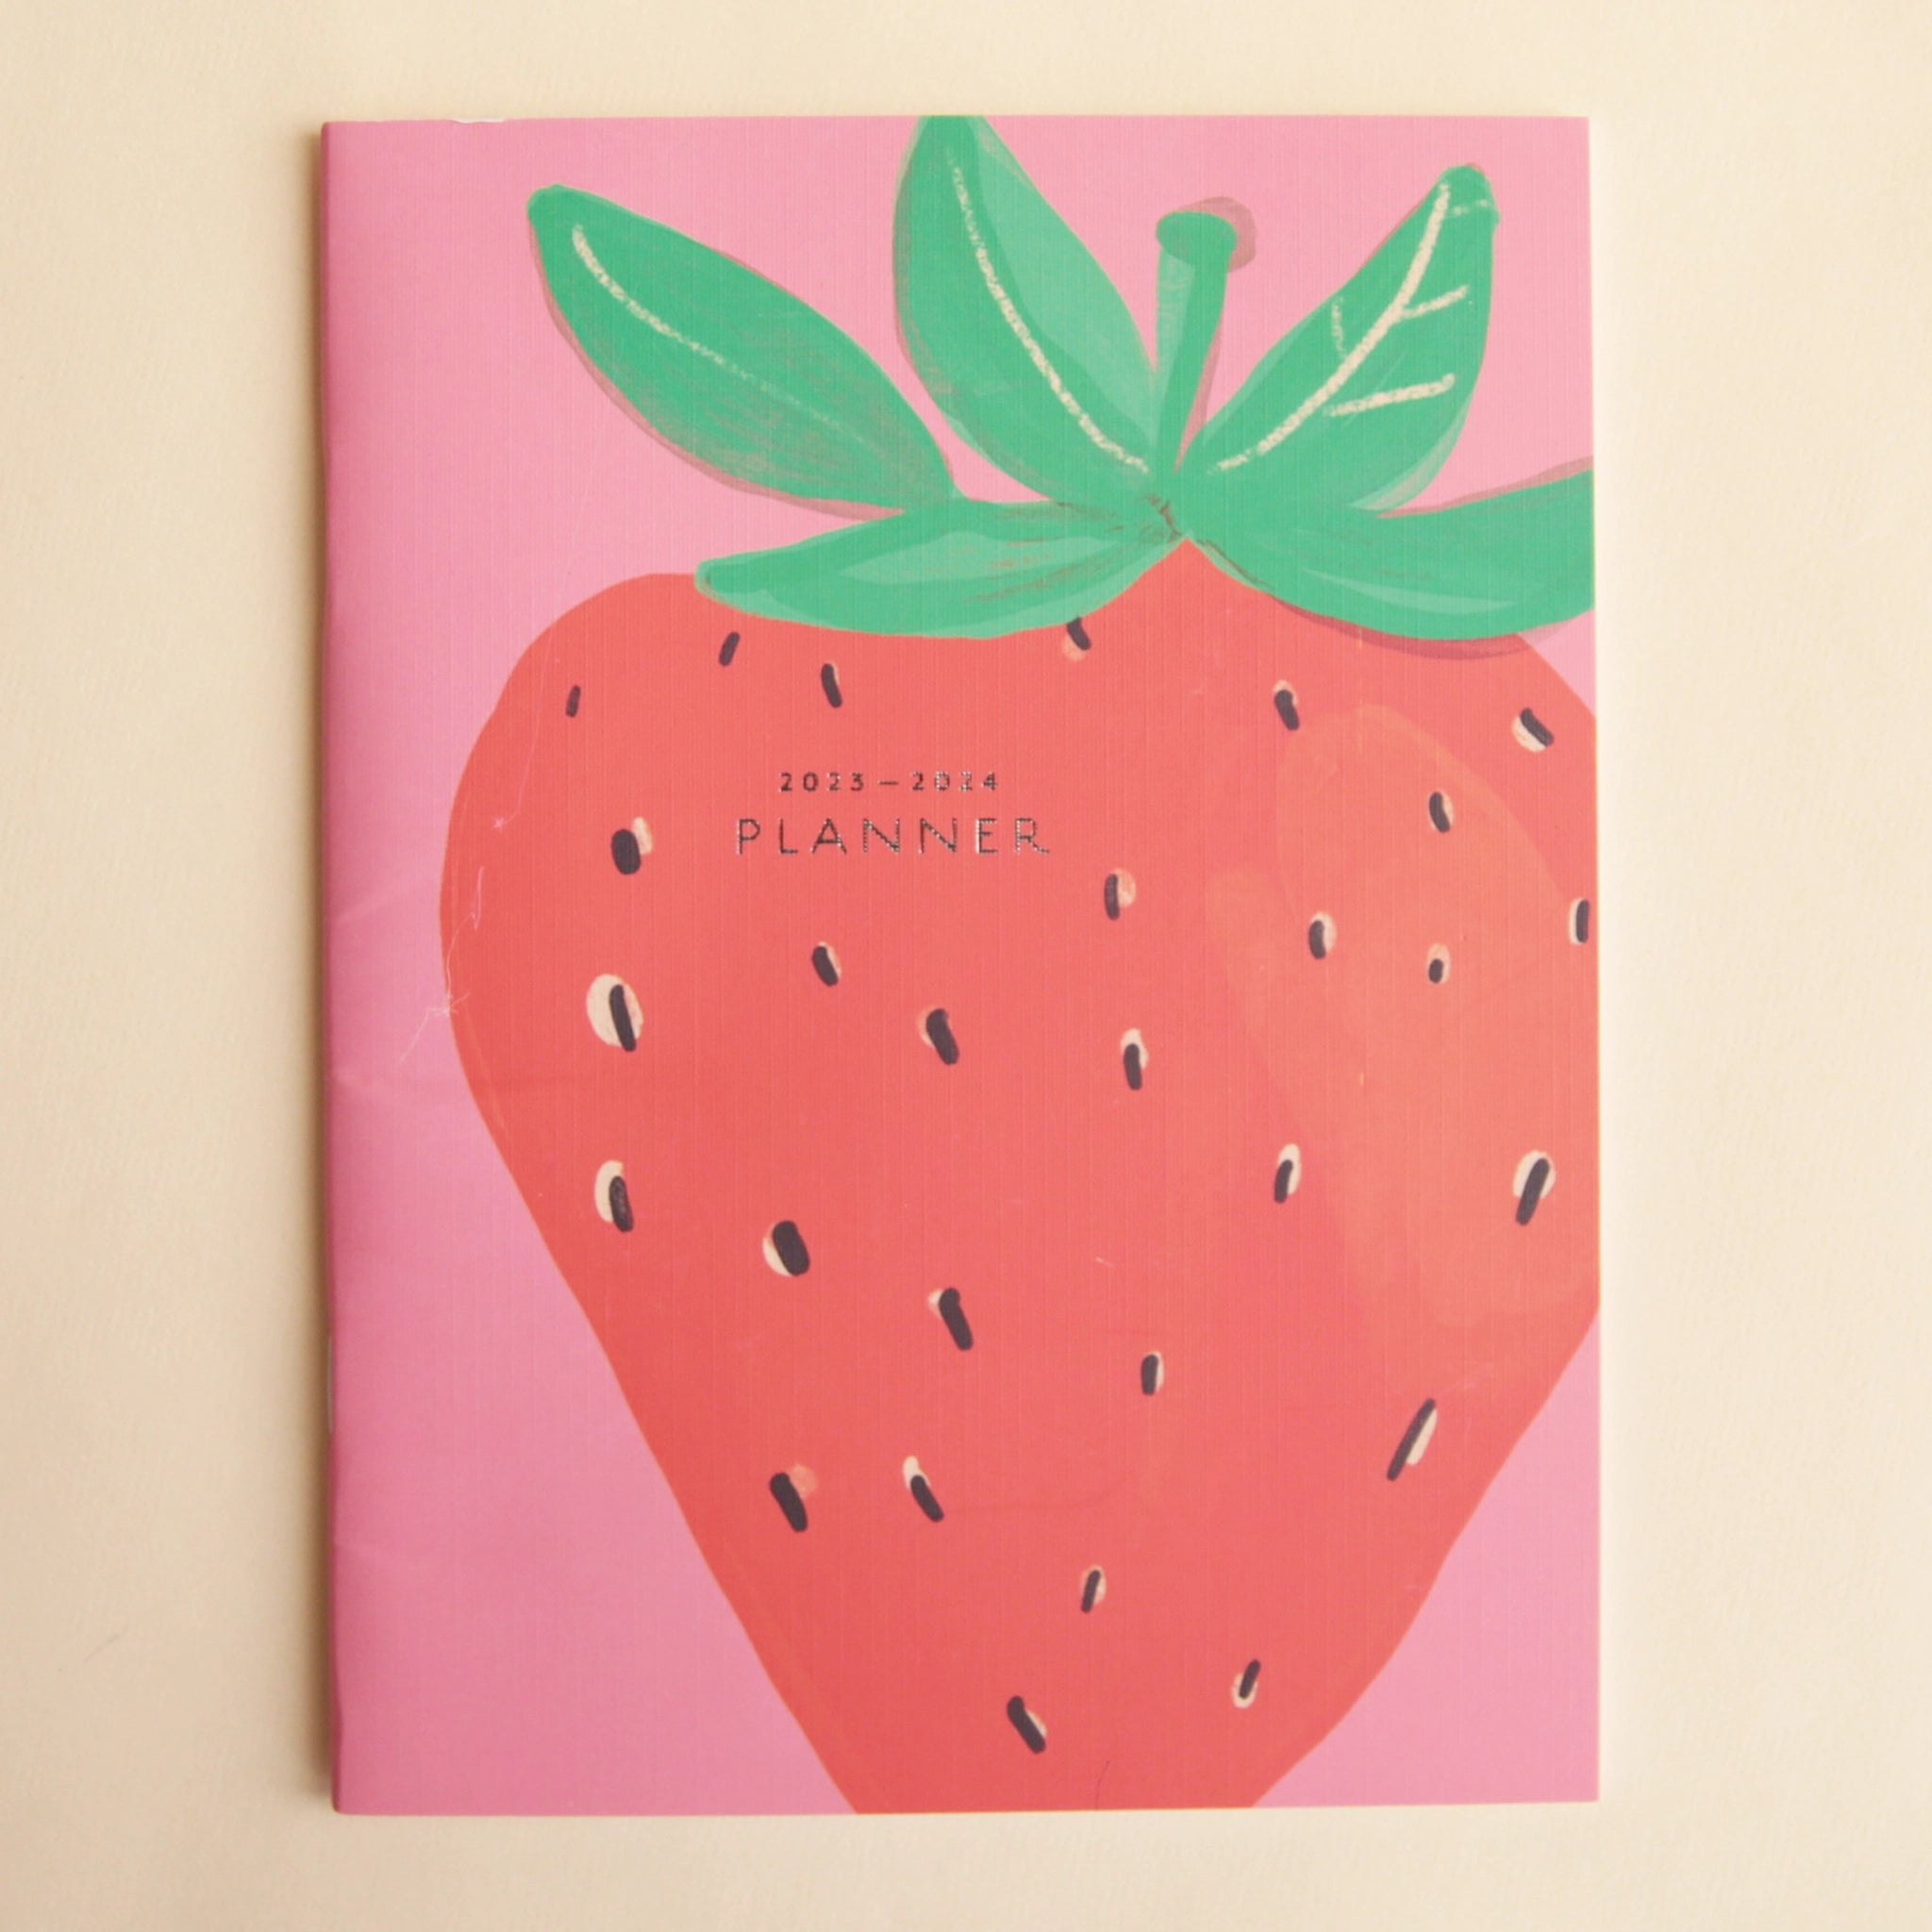 On a beige background is a pink and red planner with an illustration of a strawberry on the front that takes up nearly the entire cover. There is text in the center that reads, &quot;2023-2024 PLANNER&quot;. 